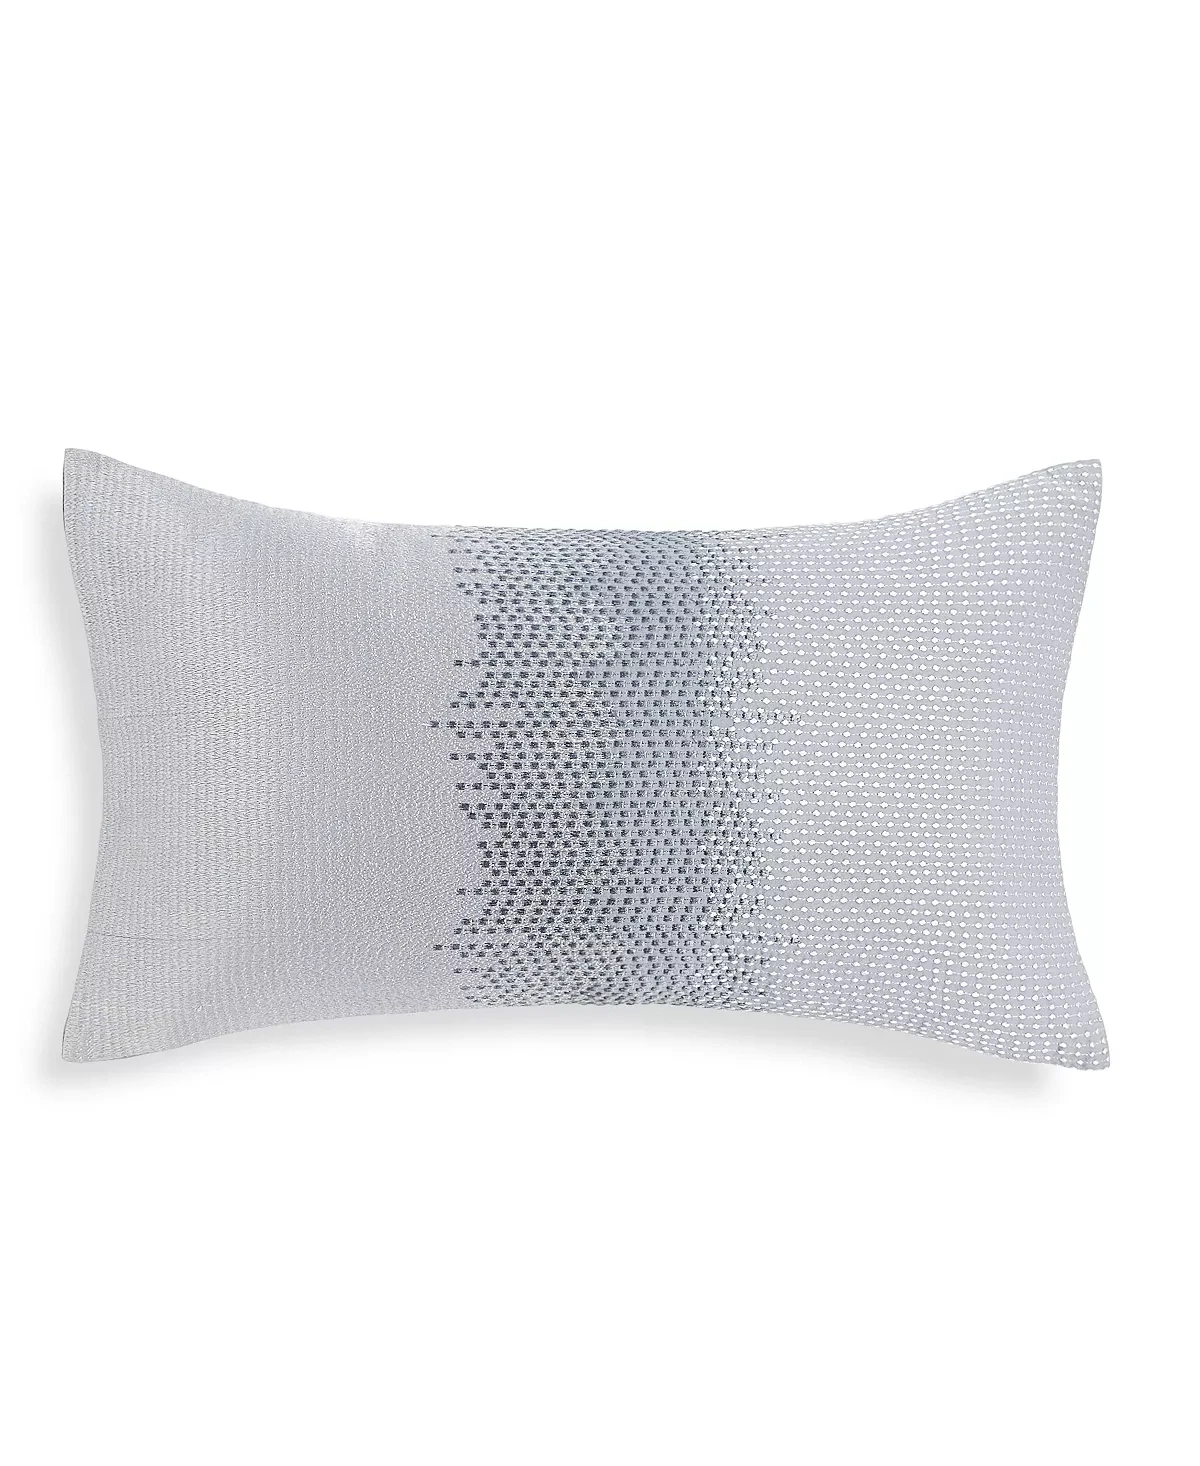 Hotel Collection Wavelet Decorative Pillow, 12" X 22", Slate